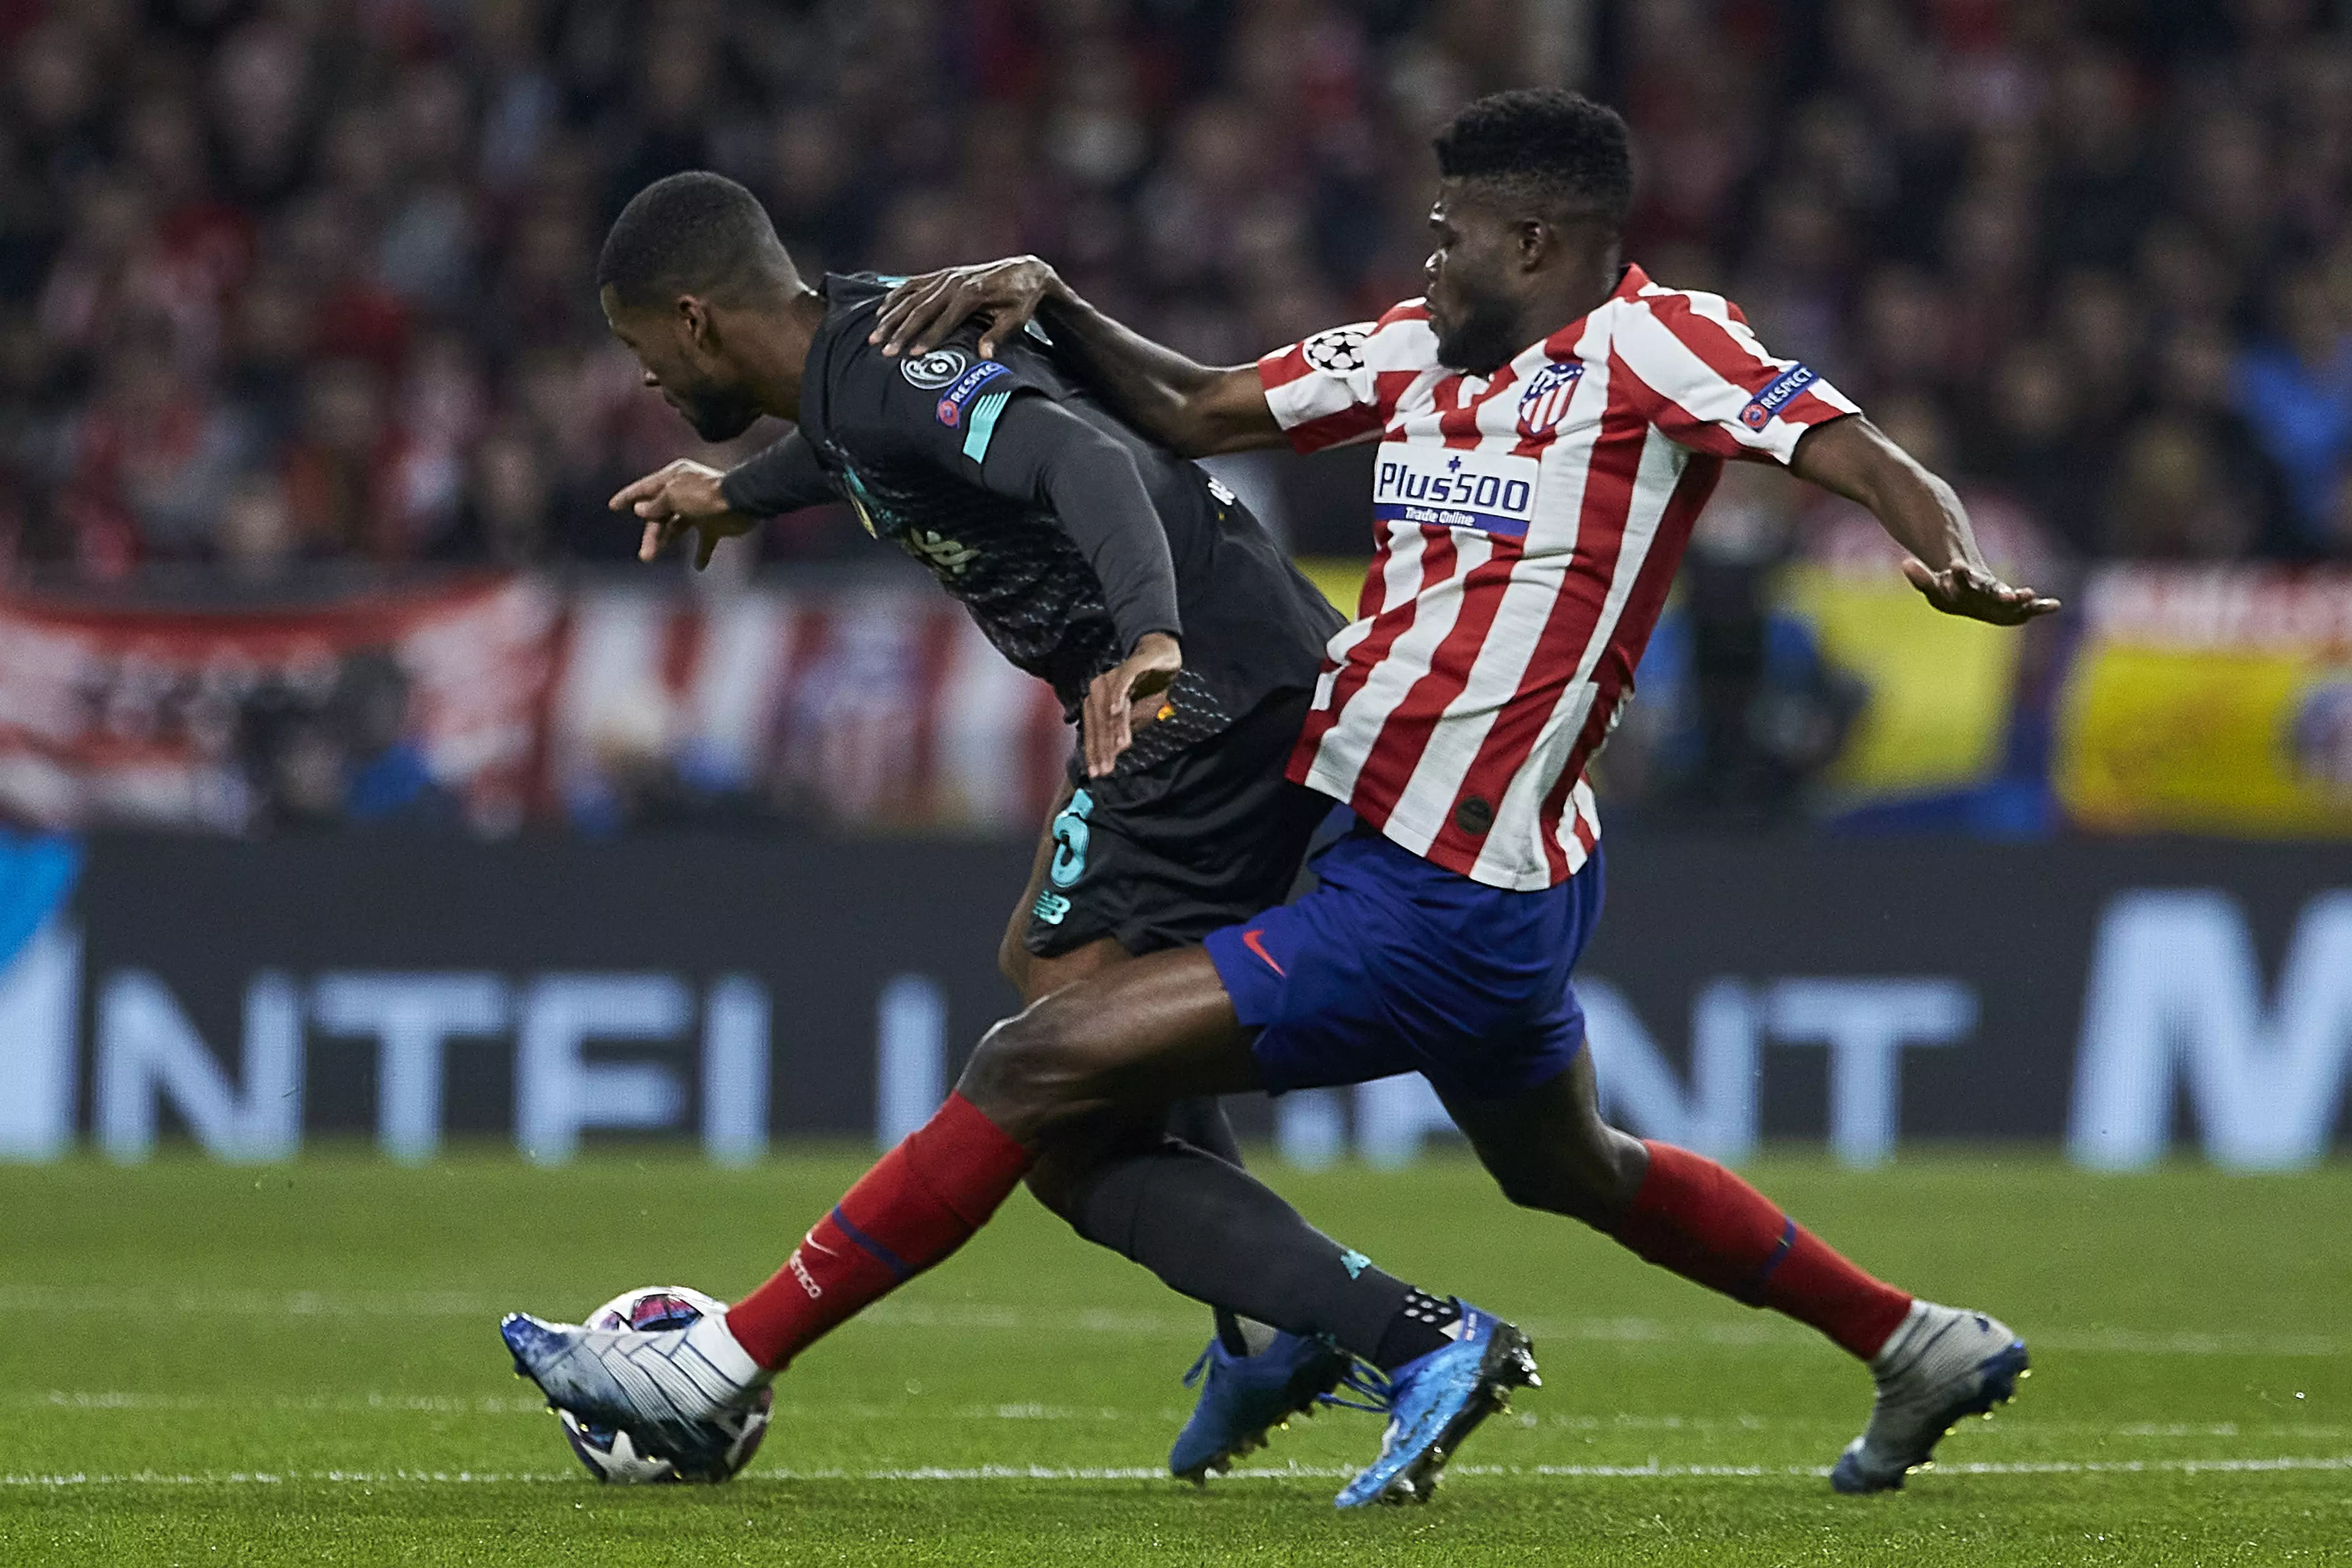 Partey was excellent against Liverpool in the Champions League. Image: PA Images